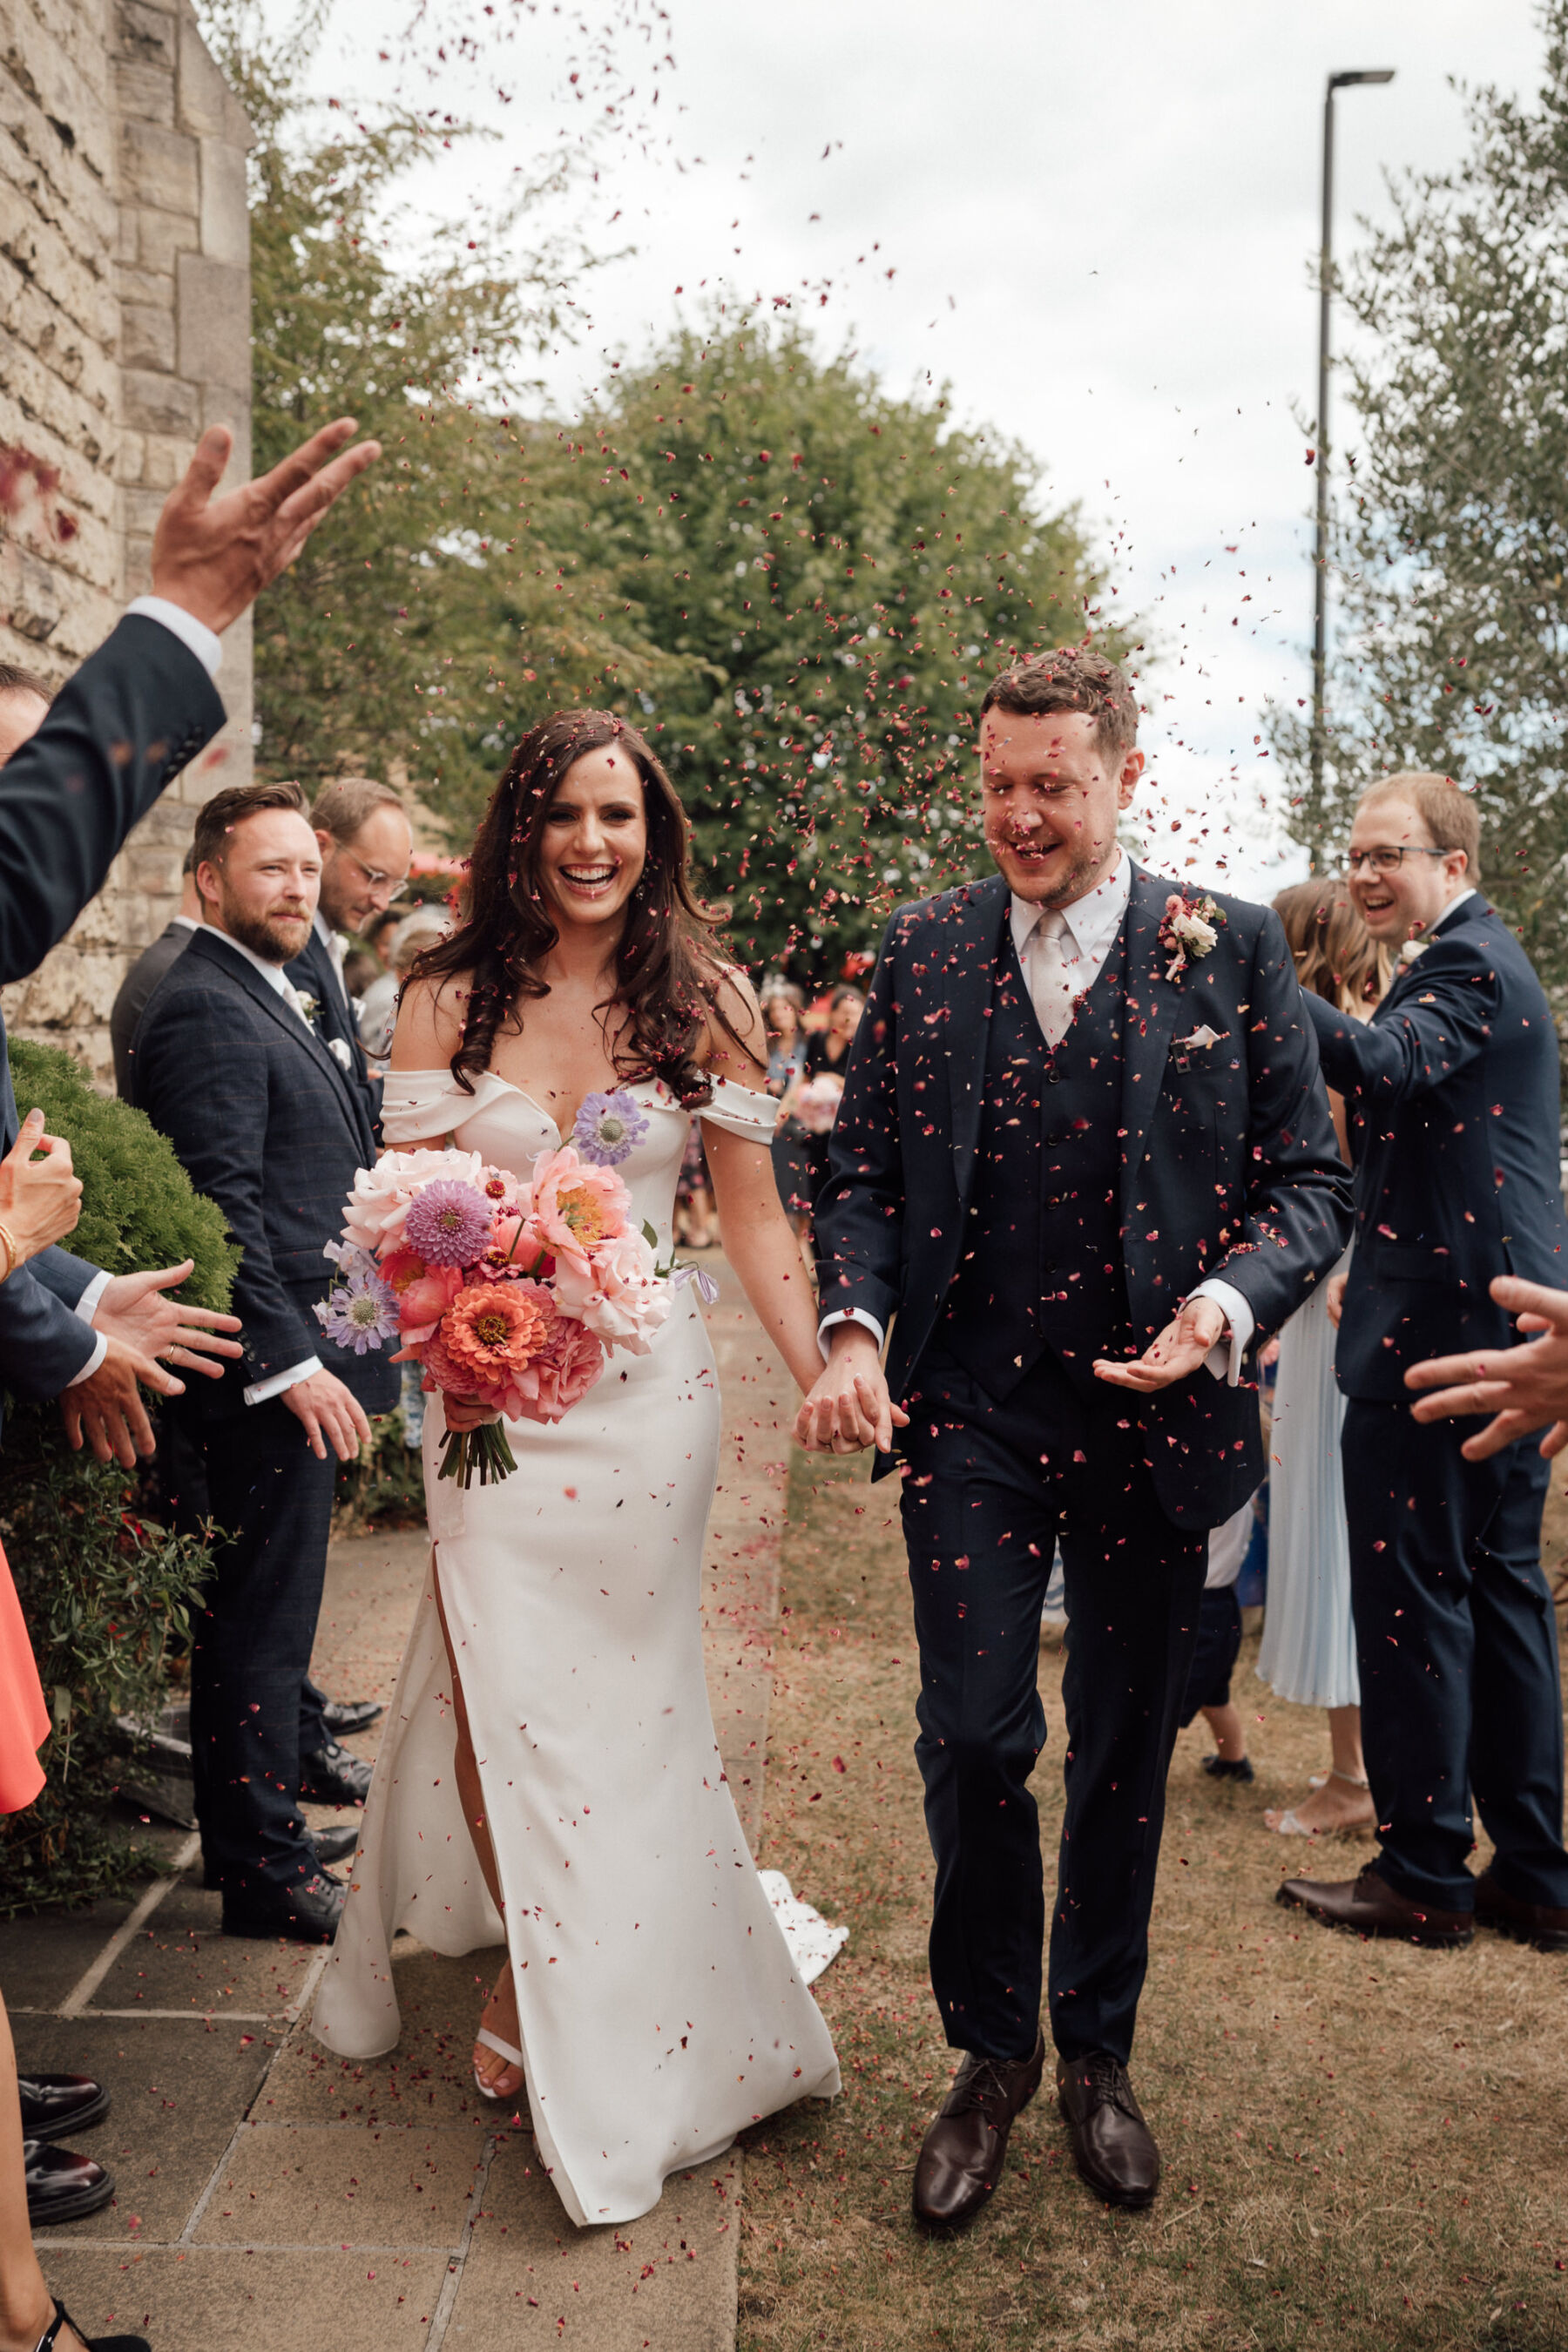 Bride and groom in a confetti shower. Bride in Roxy by Suzanne Neville, carrying a large, bright and bold bouquet by BUD Flora. The Shannons Phtoography.